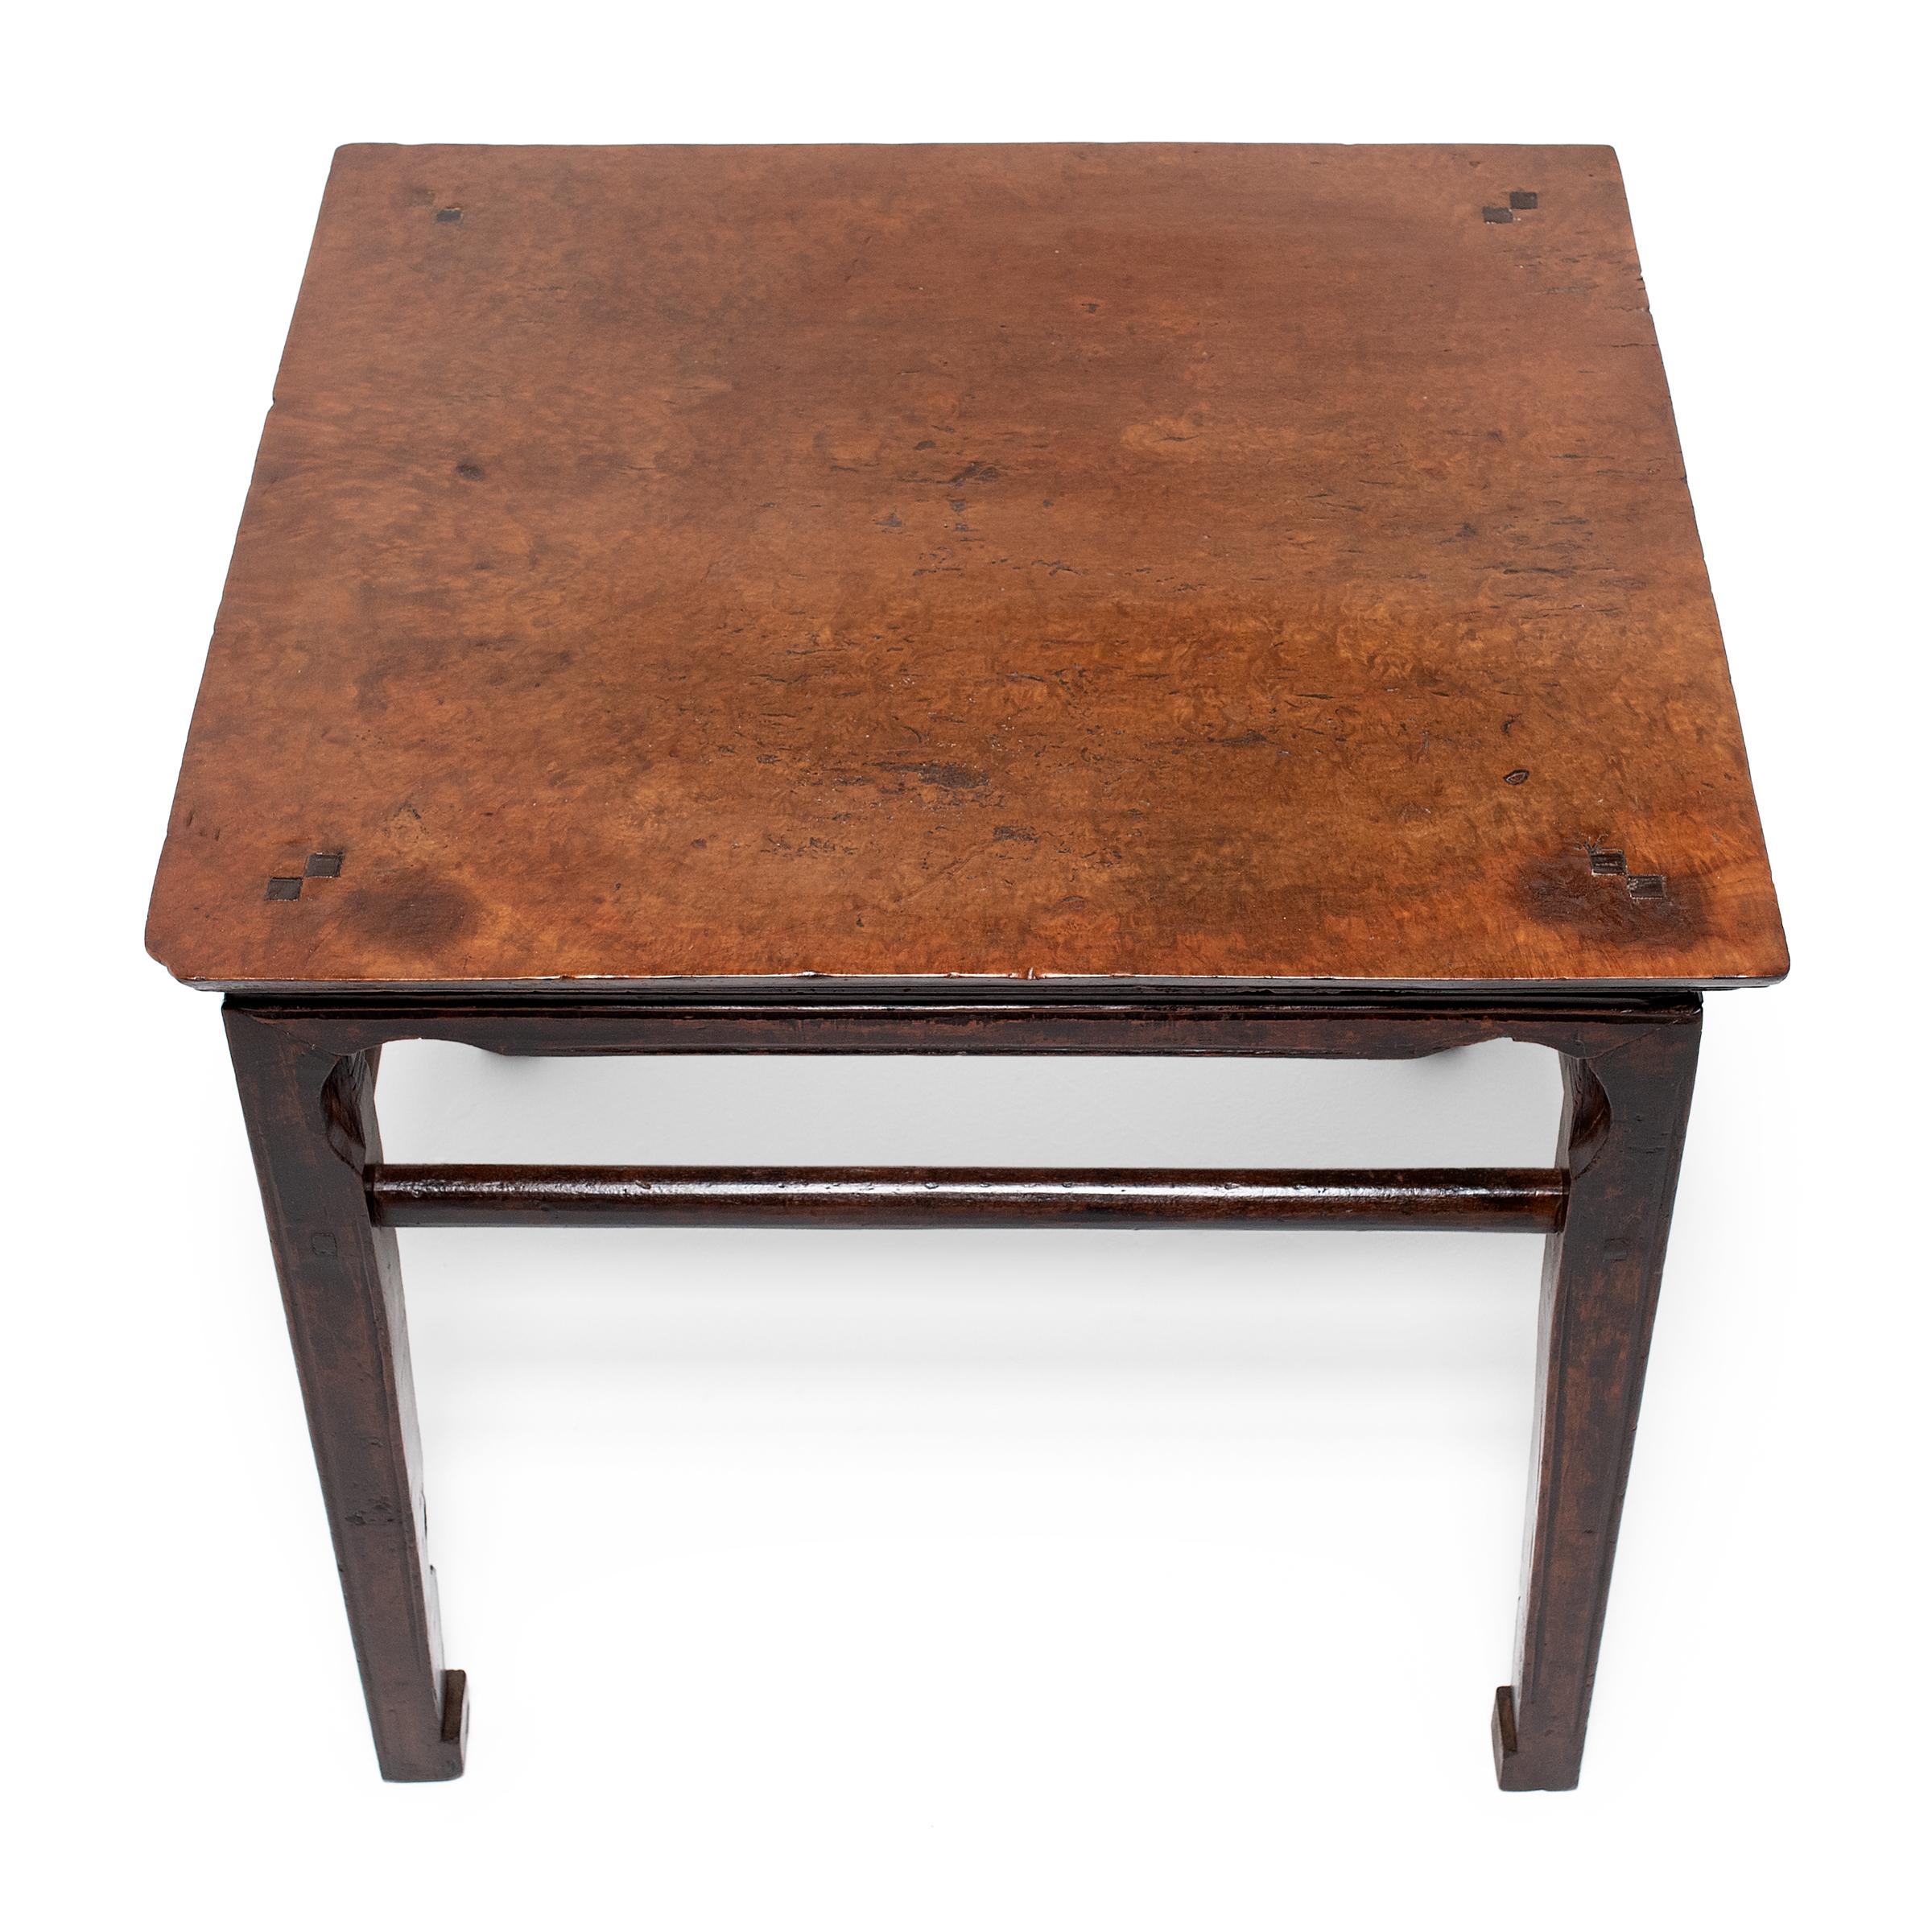 This square center table dates to the mid-19th century and wonderfully exemplifies Qing-dynasty furniture design. Found at the center of social activity, Chinese square tables such as this were used on a daily basis for eating meals, serving tea, or